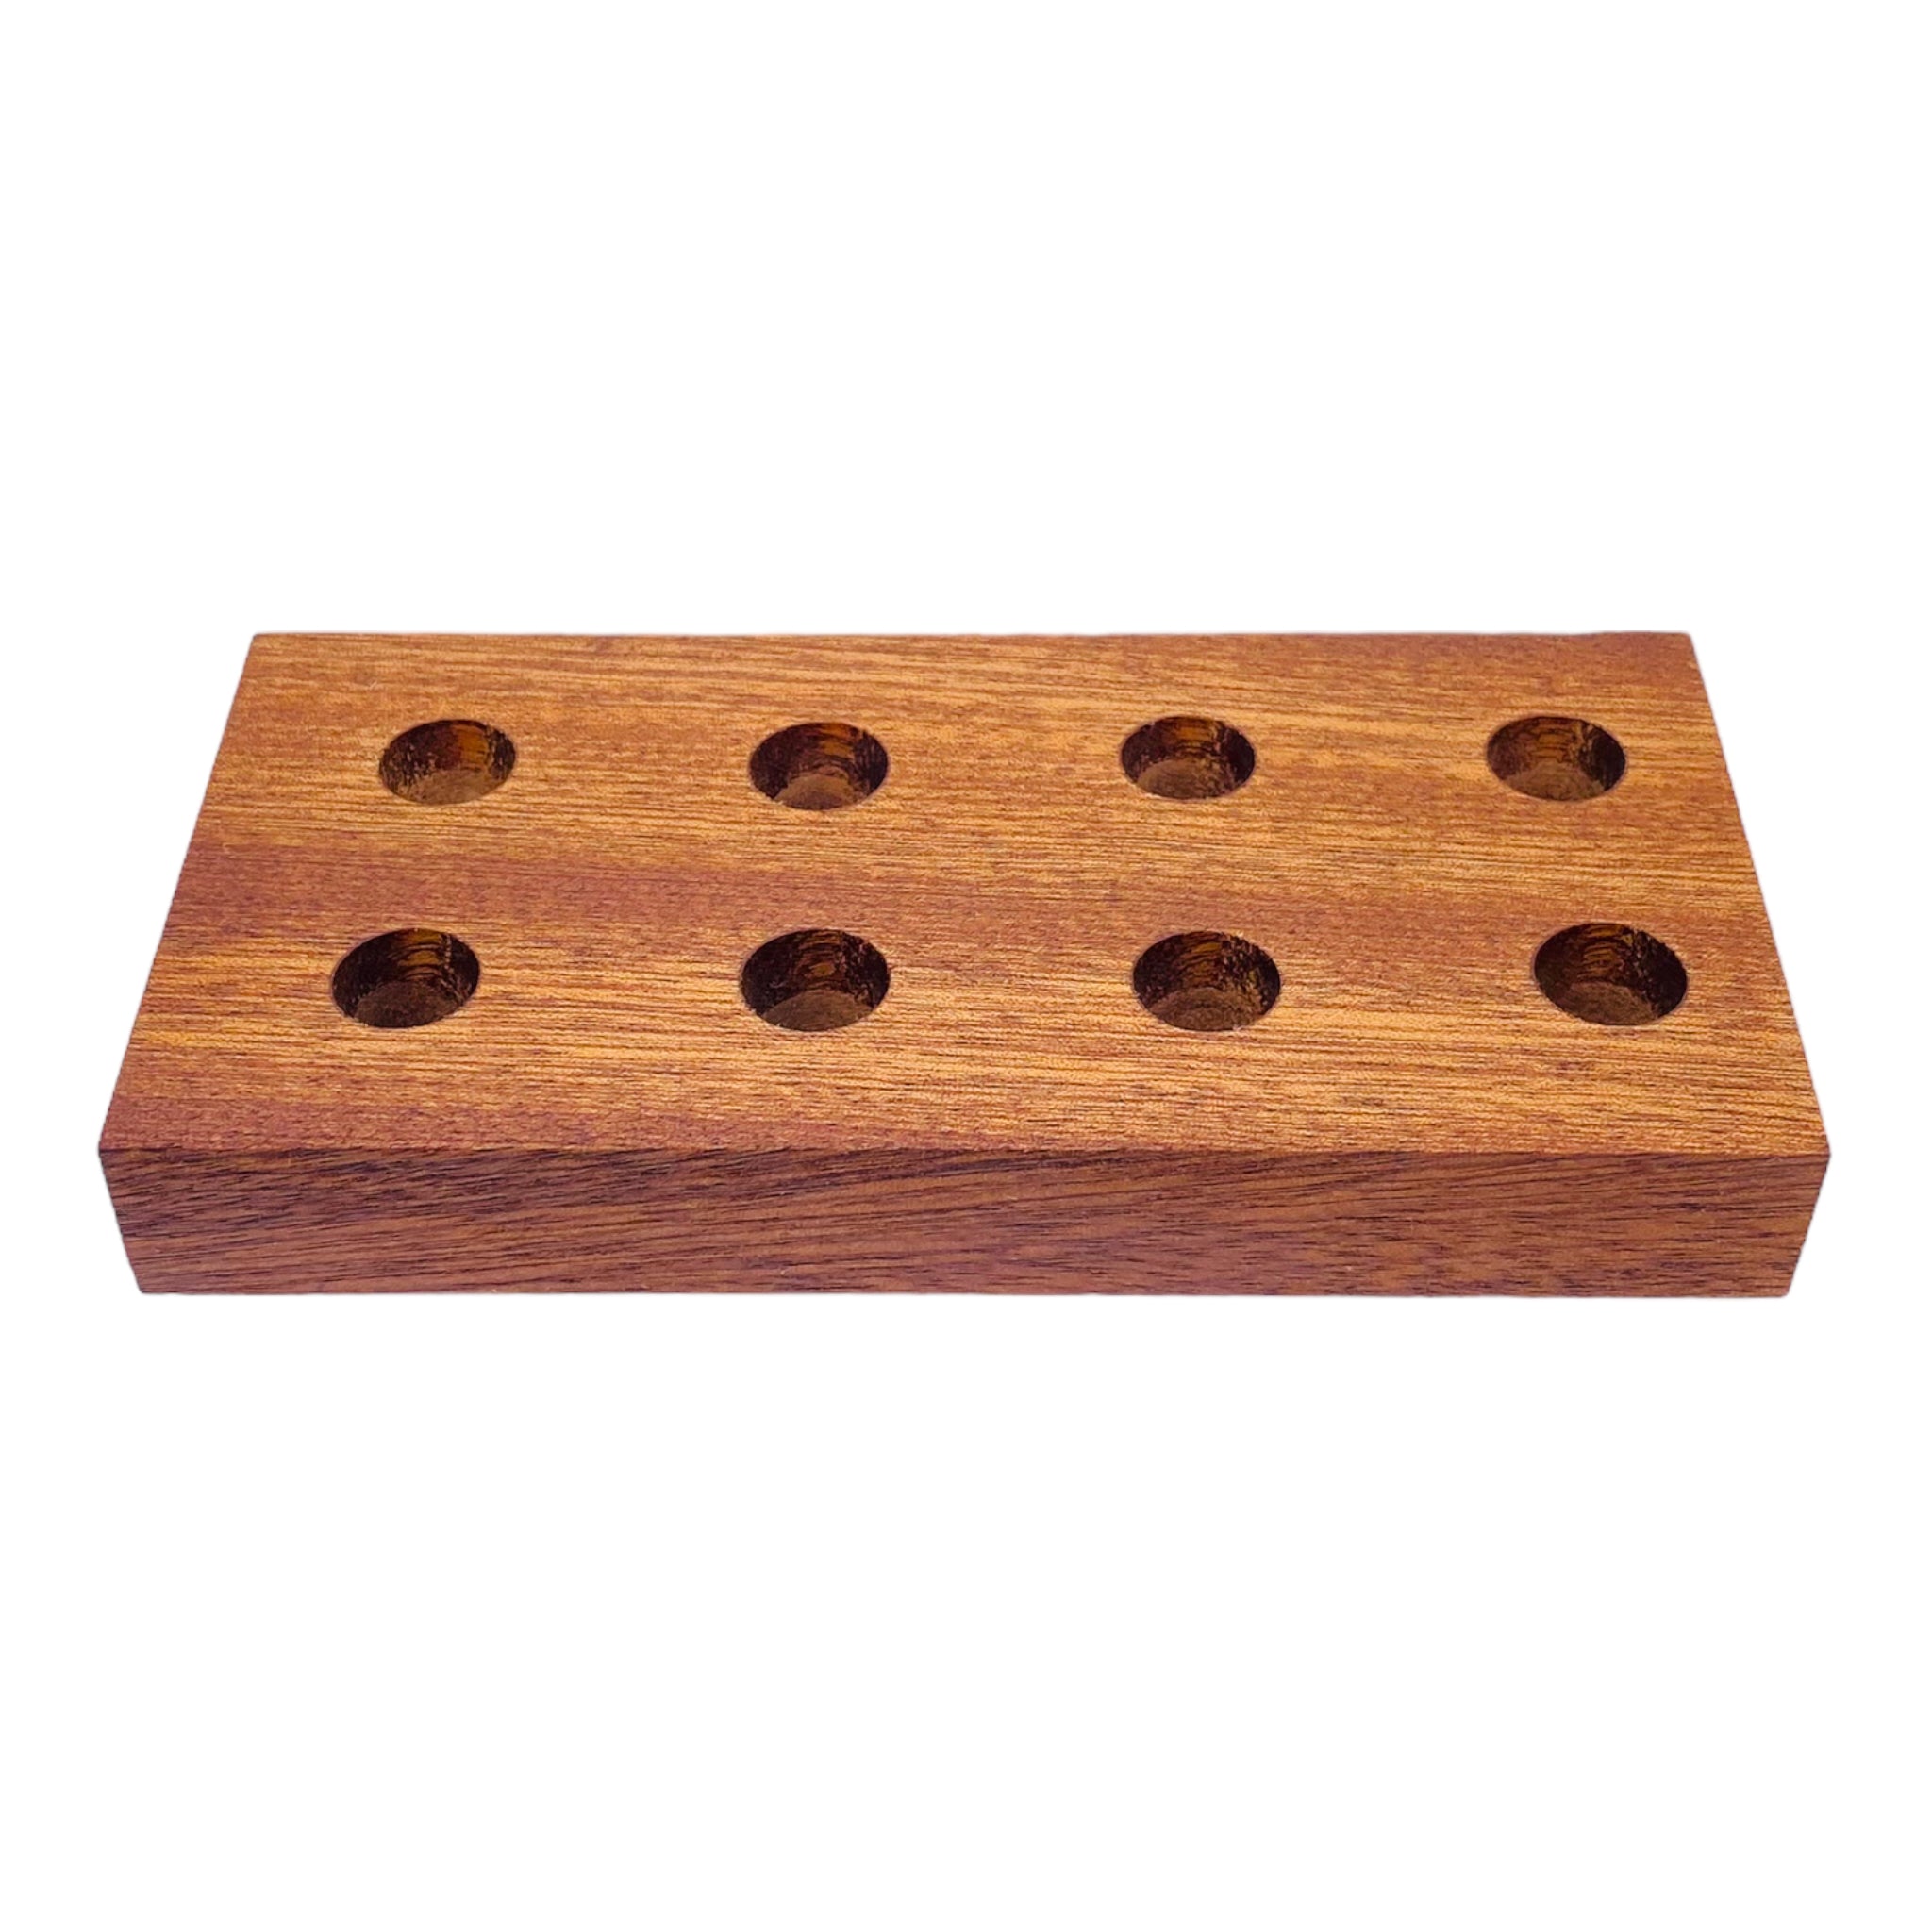 8 Hole Wood Display Stand Holder For 14mm Bong Bowl Pieces Or Quartz Bangers - Mahogany